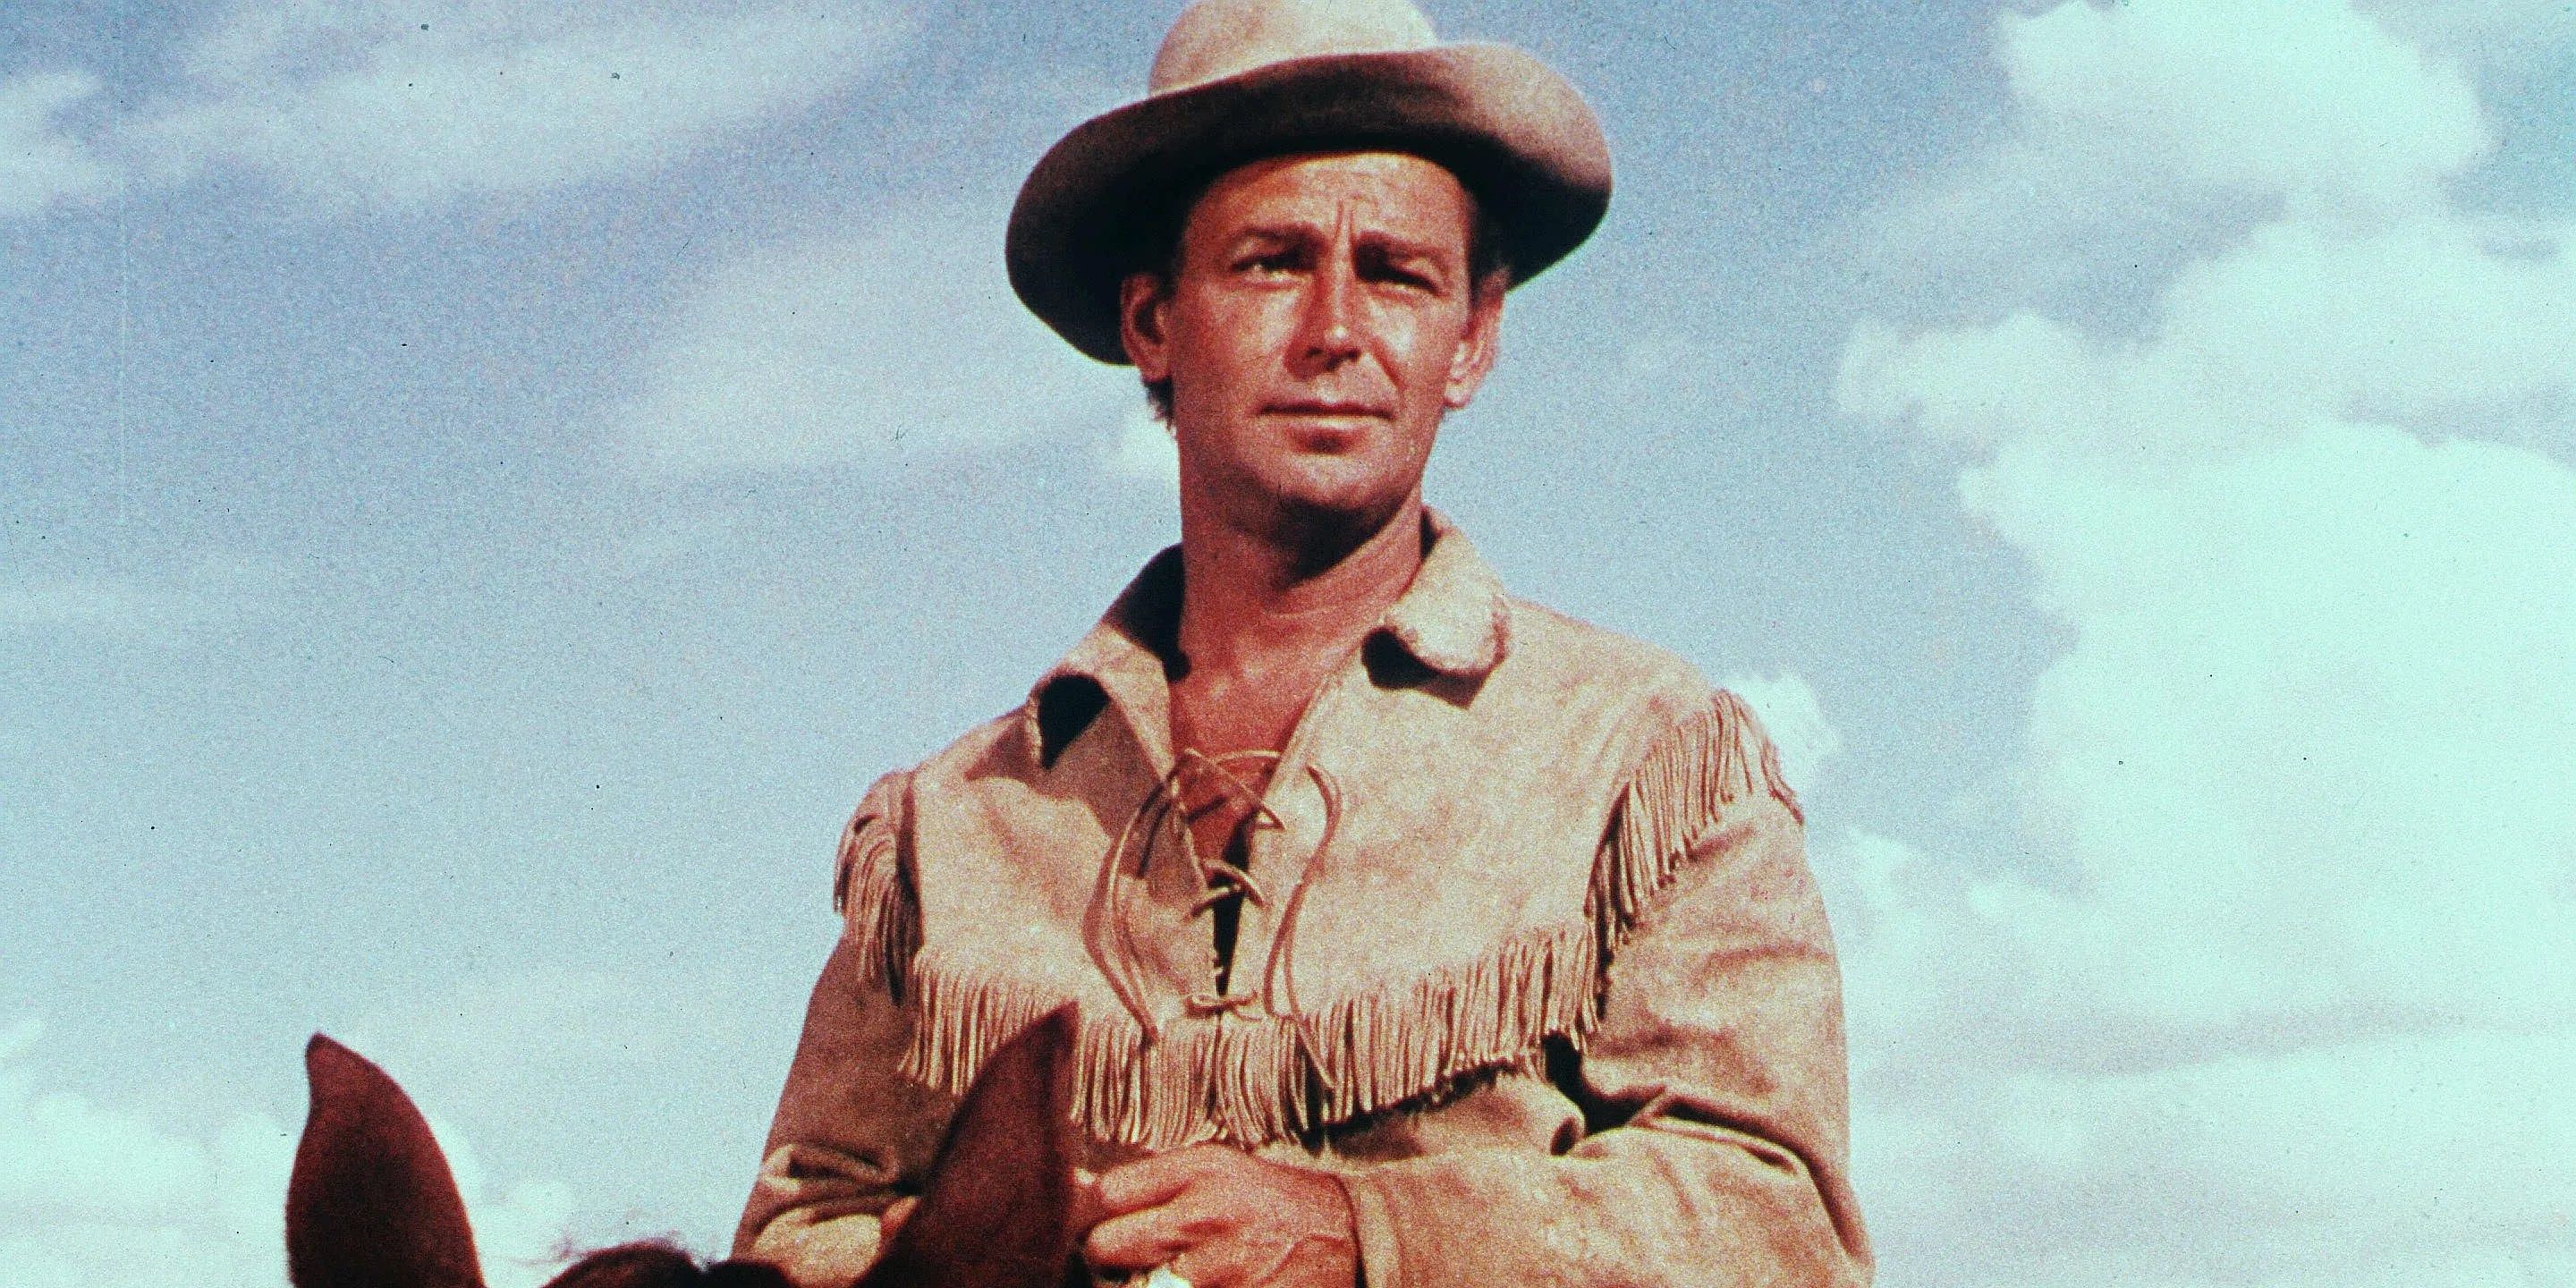 Shane (Alan Ladd) wears a light hat and jacket as he rides on horseback on a sunny day.